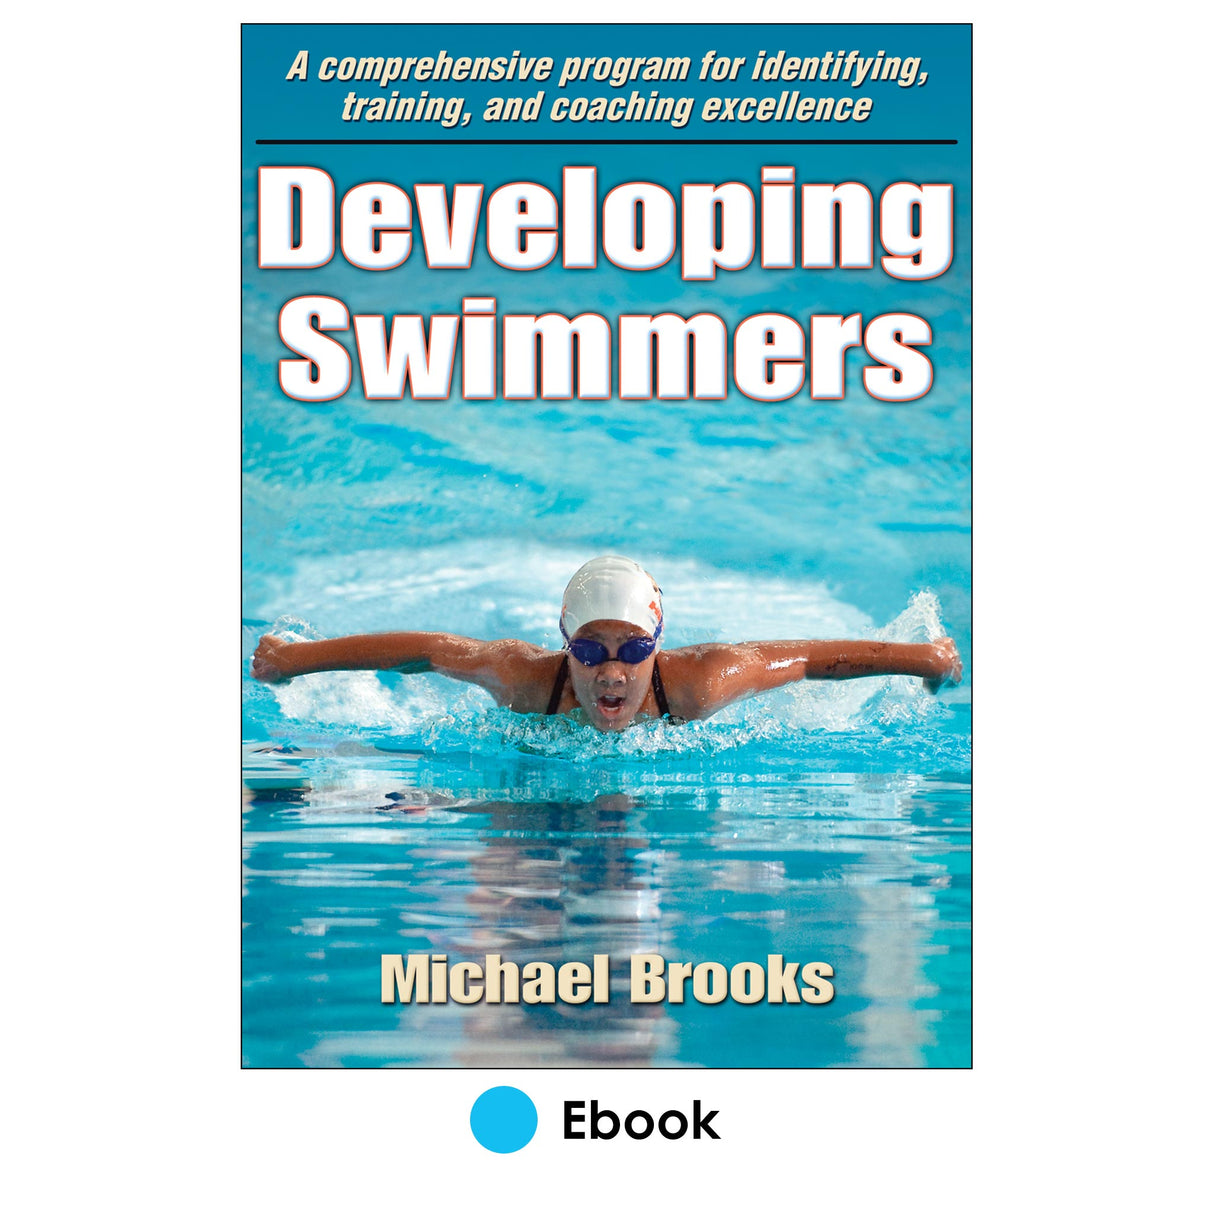 Developing Swimmers PDF